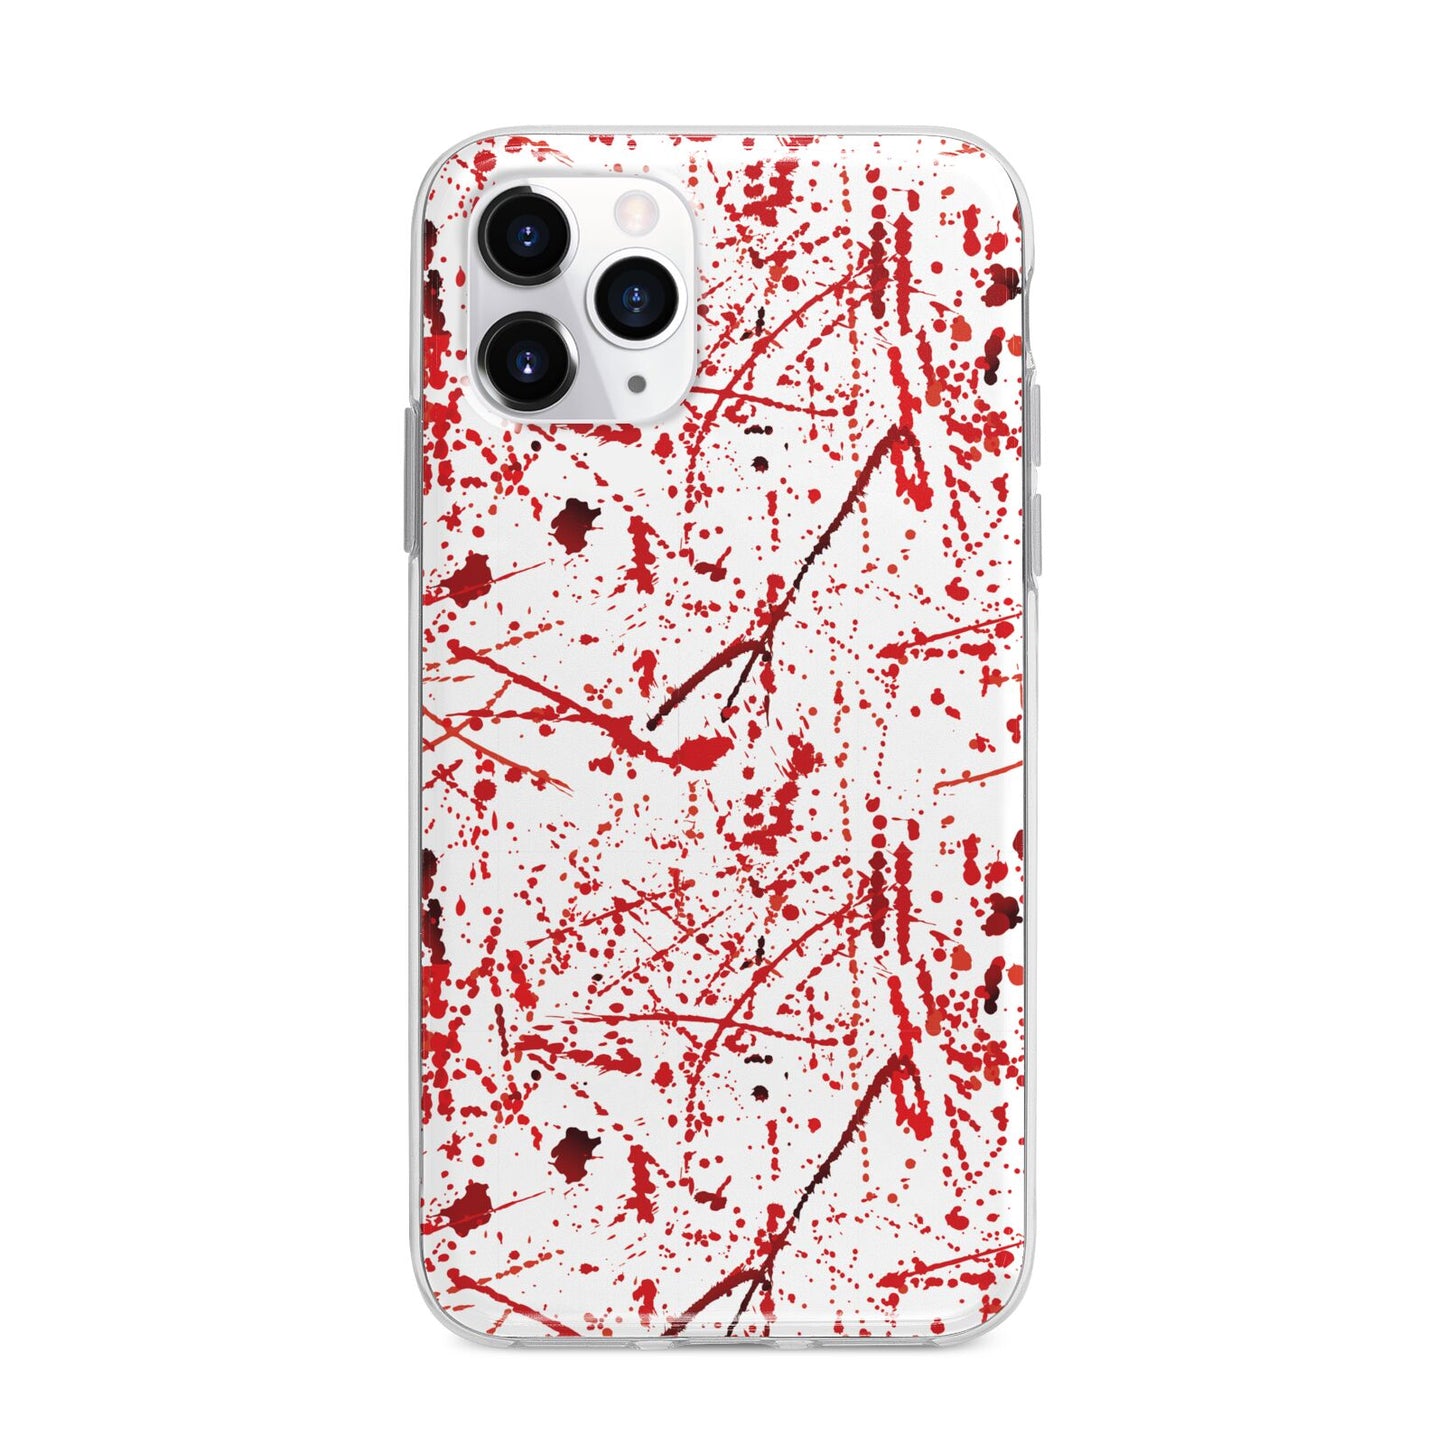 Blood Splatter Apple iPhone 11 Pro Max in Silver with Bumper Case